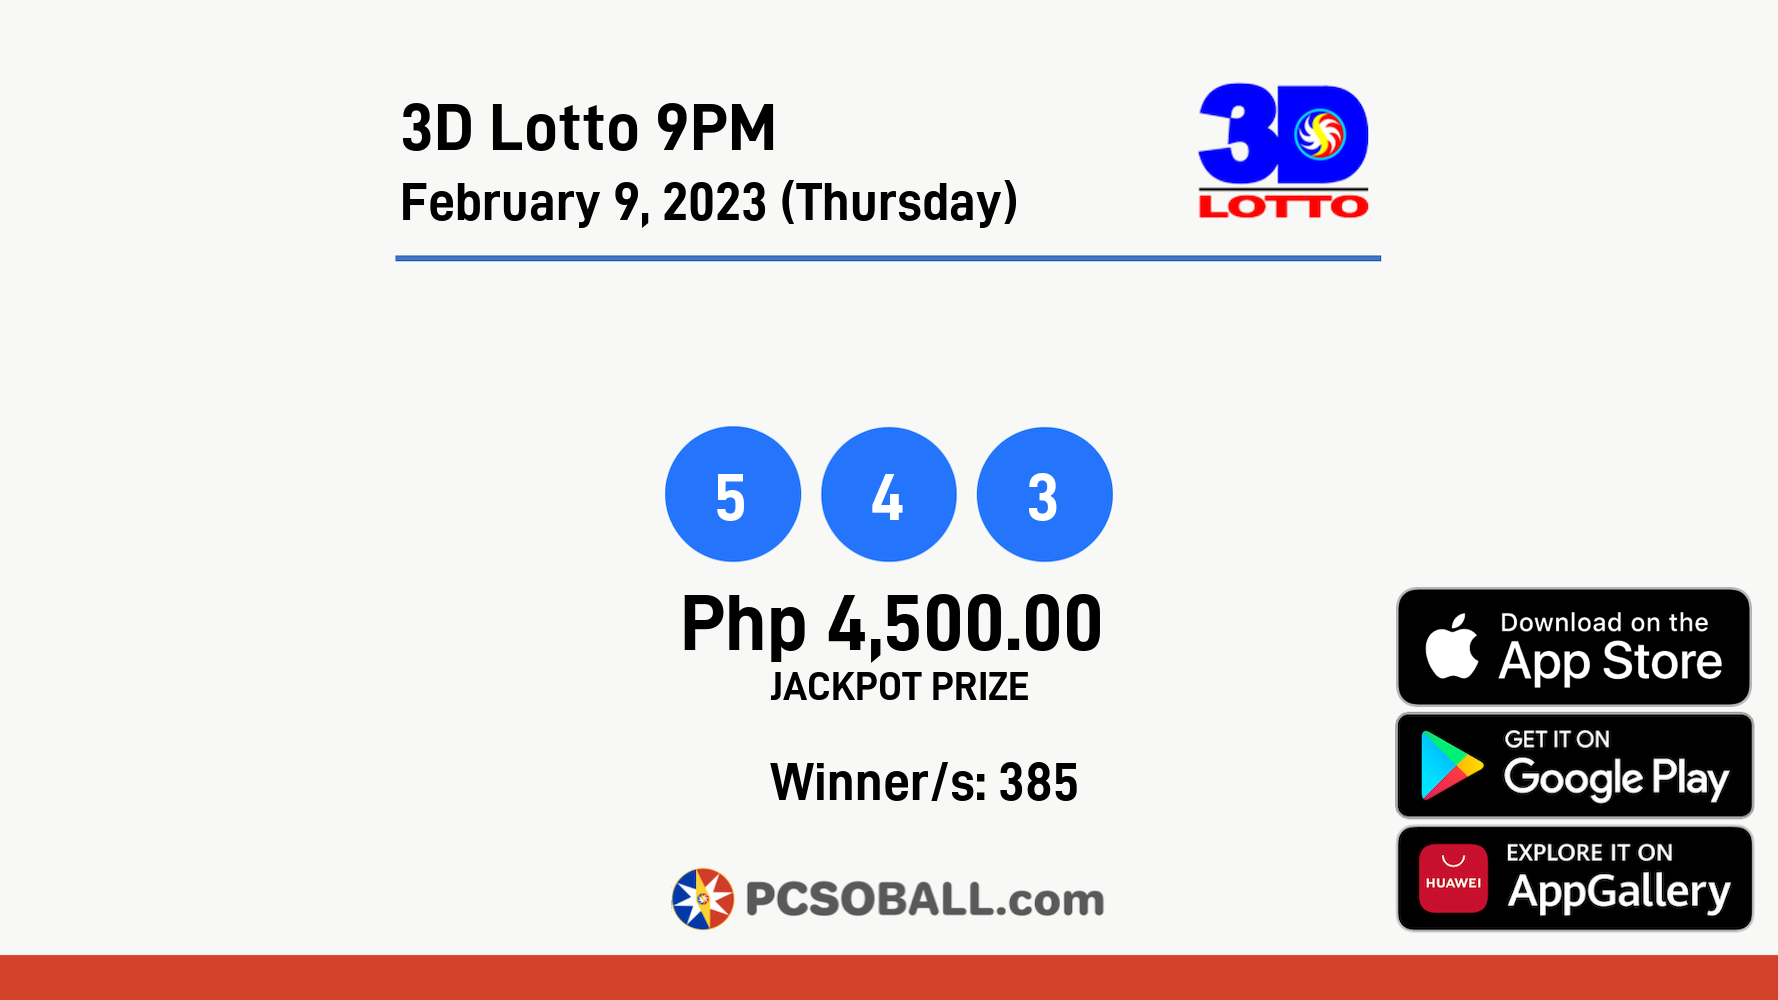 3D Lotto 9PM February 9, 2023 (Thursday) Result